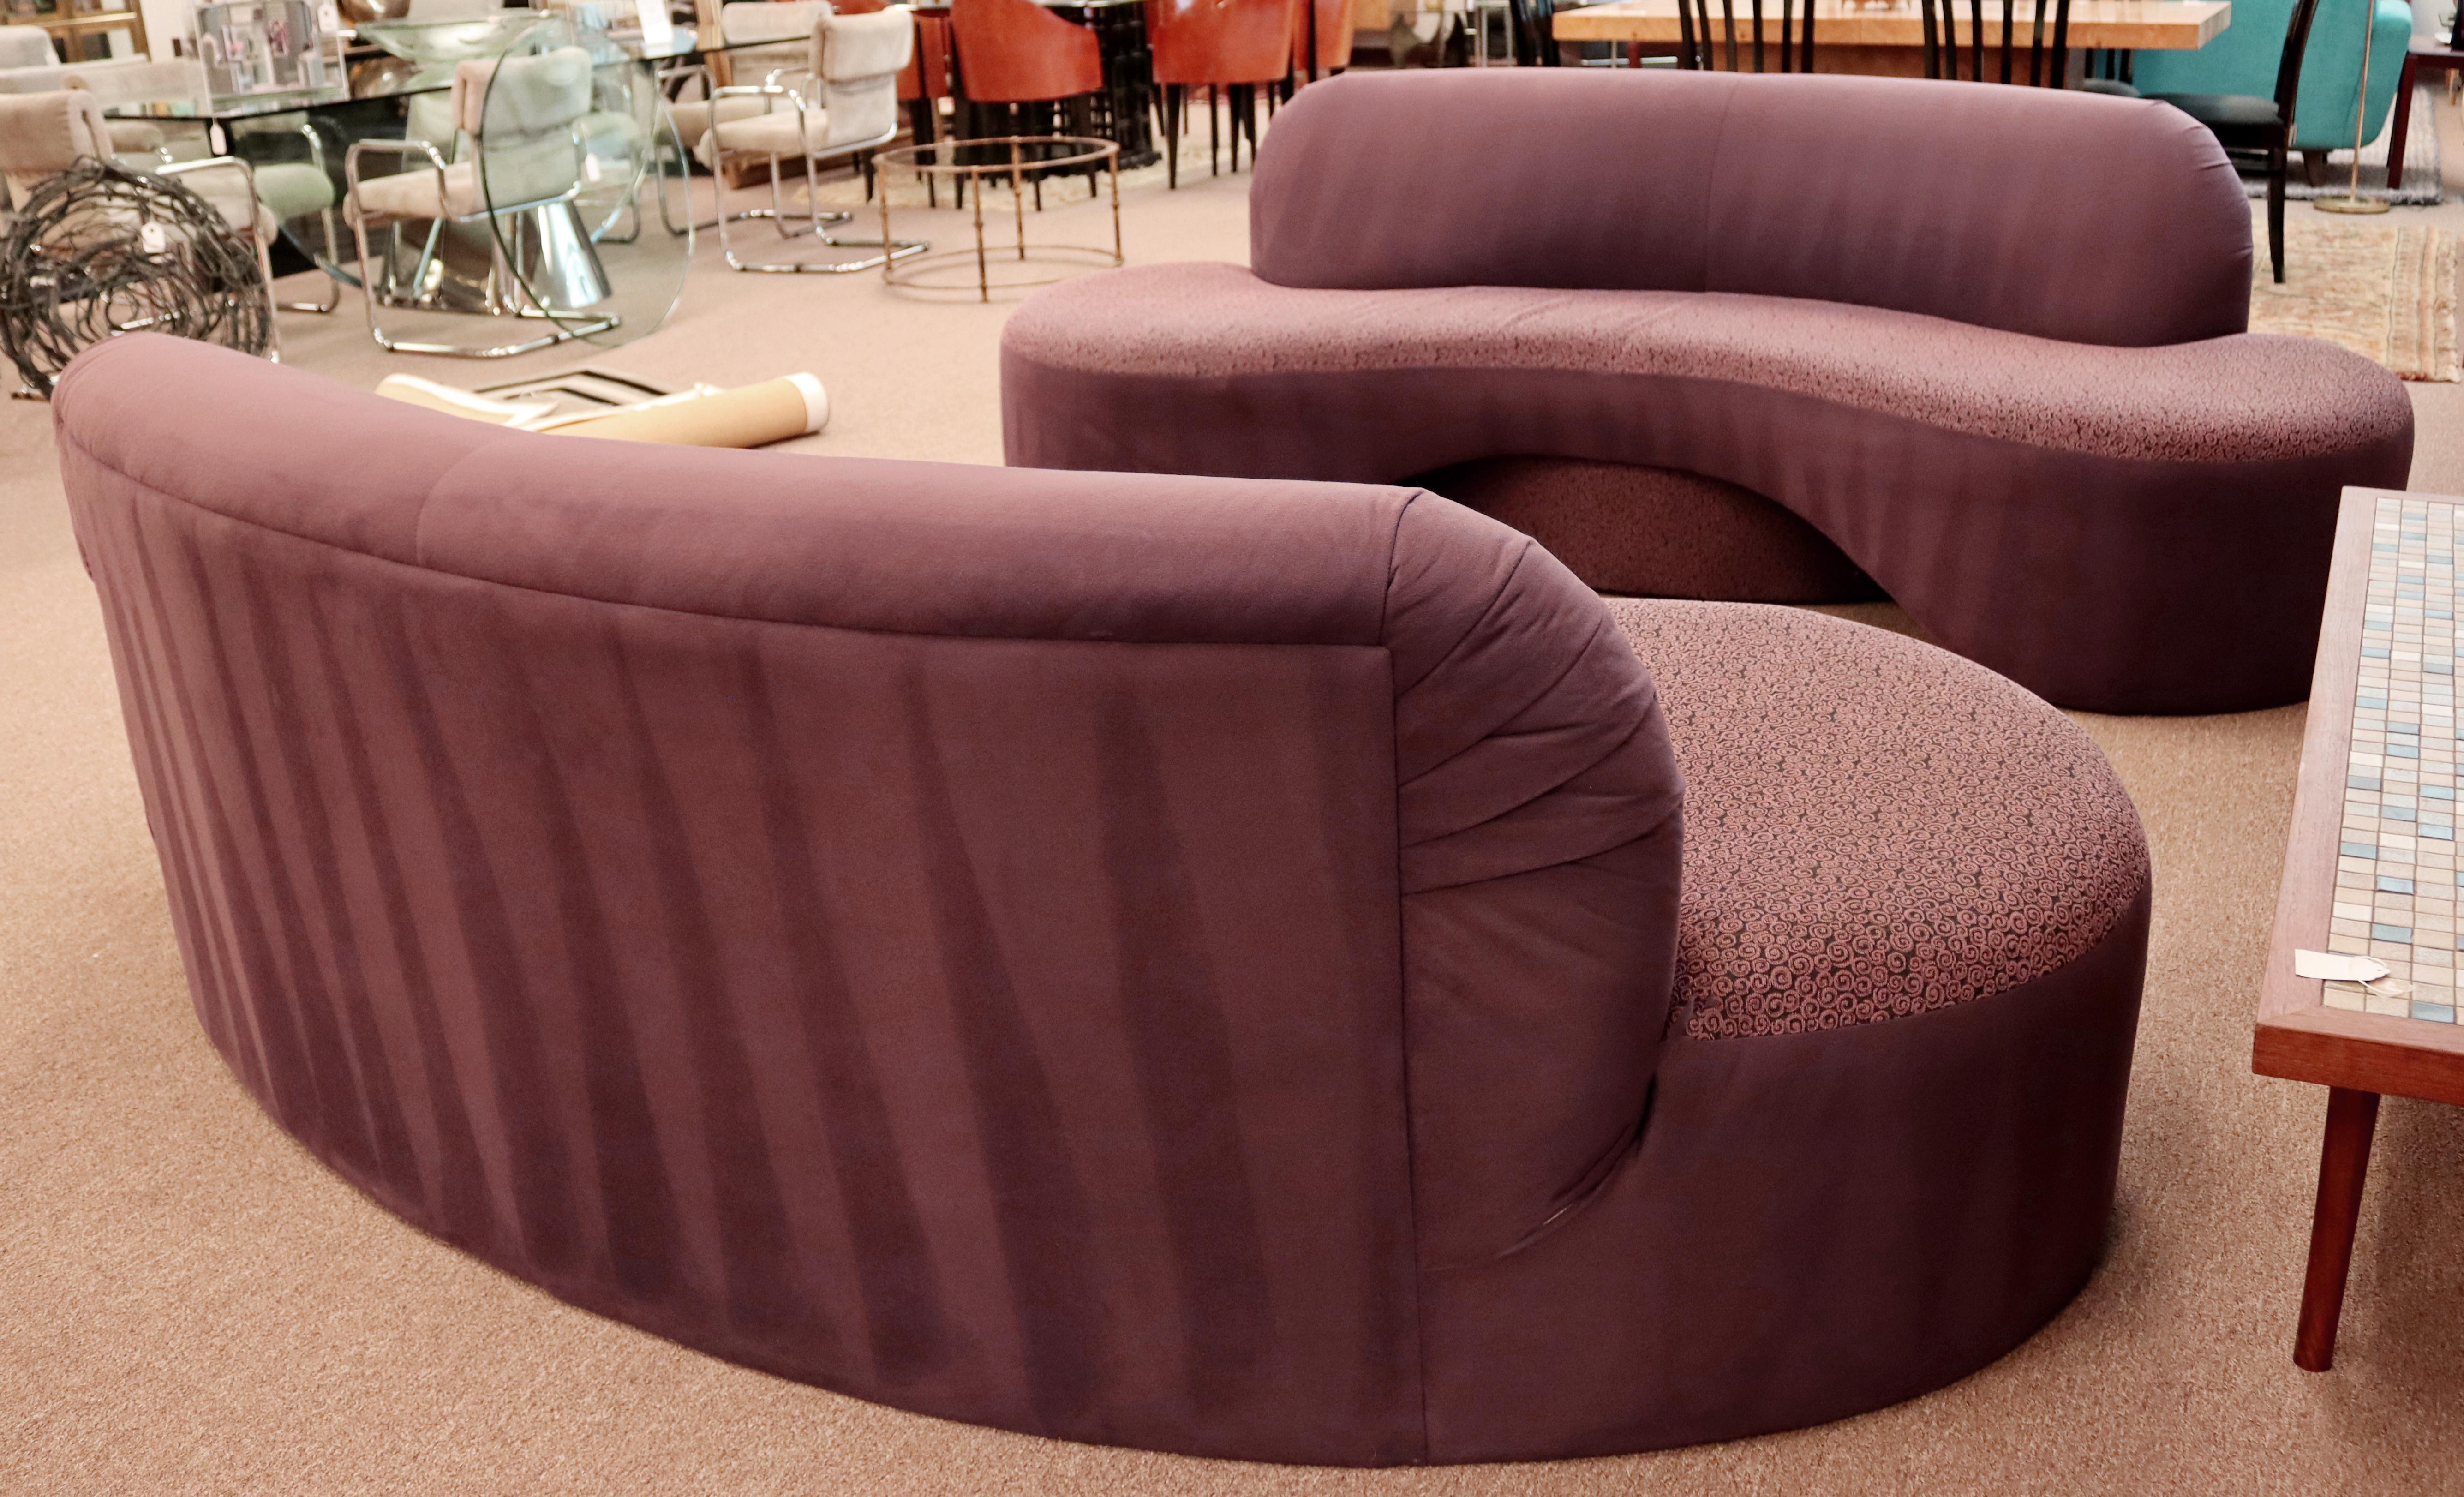 Late 20th Century Contemporary Modern Pair of Curved Serpentine Sofas 1980s